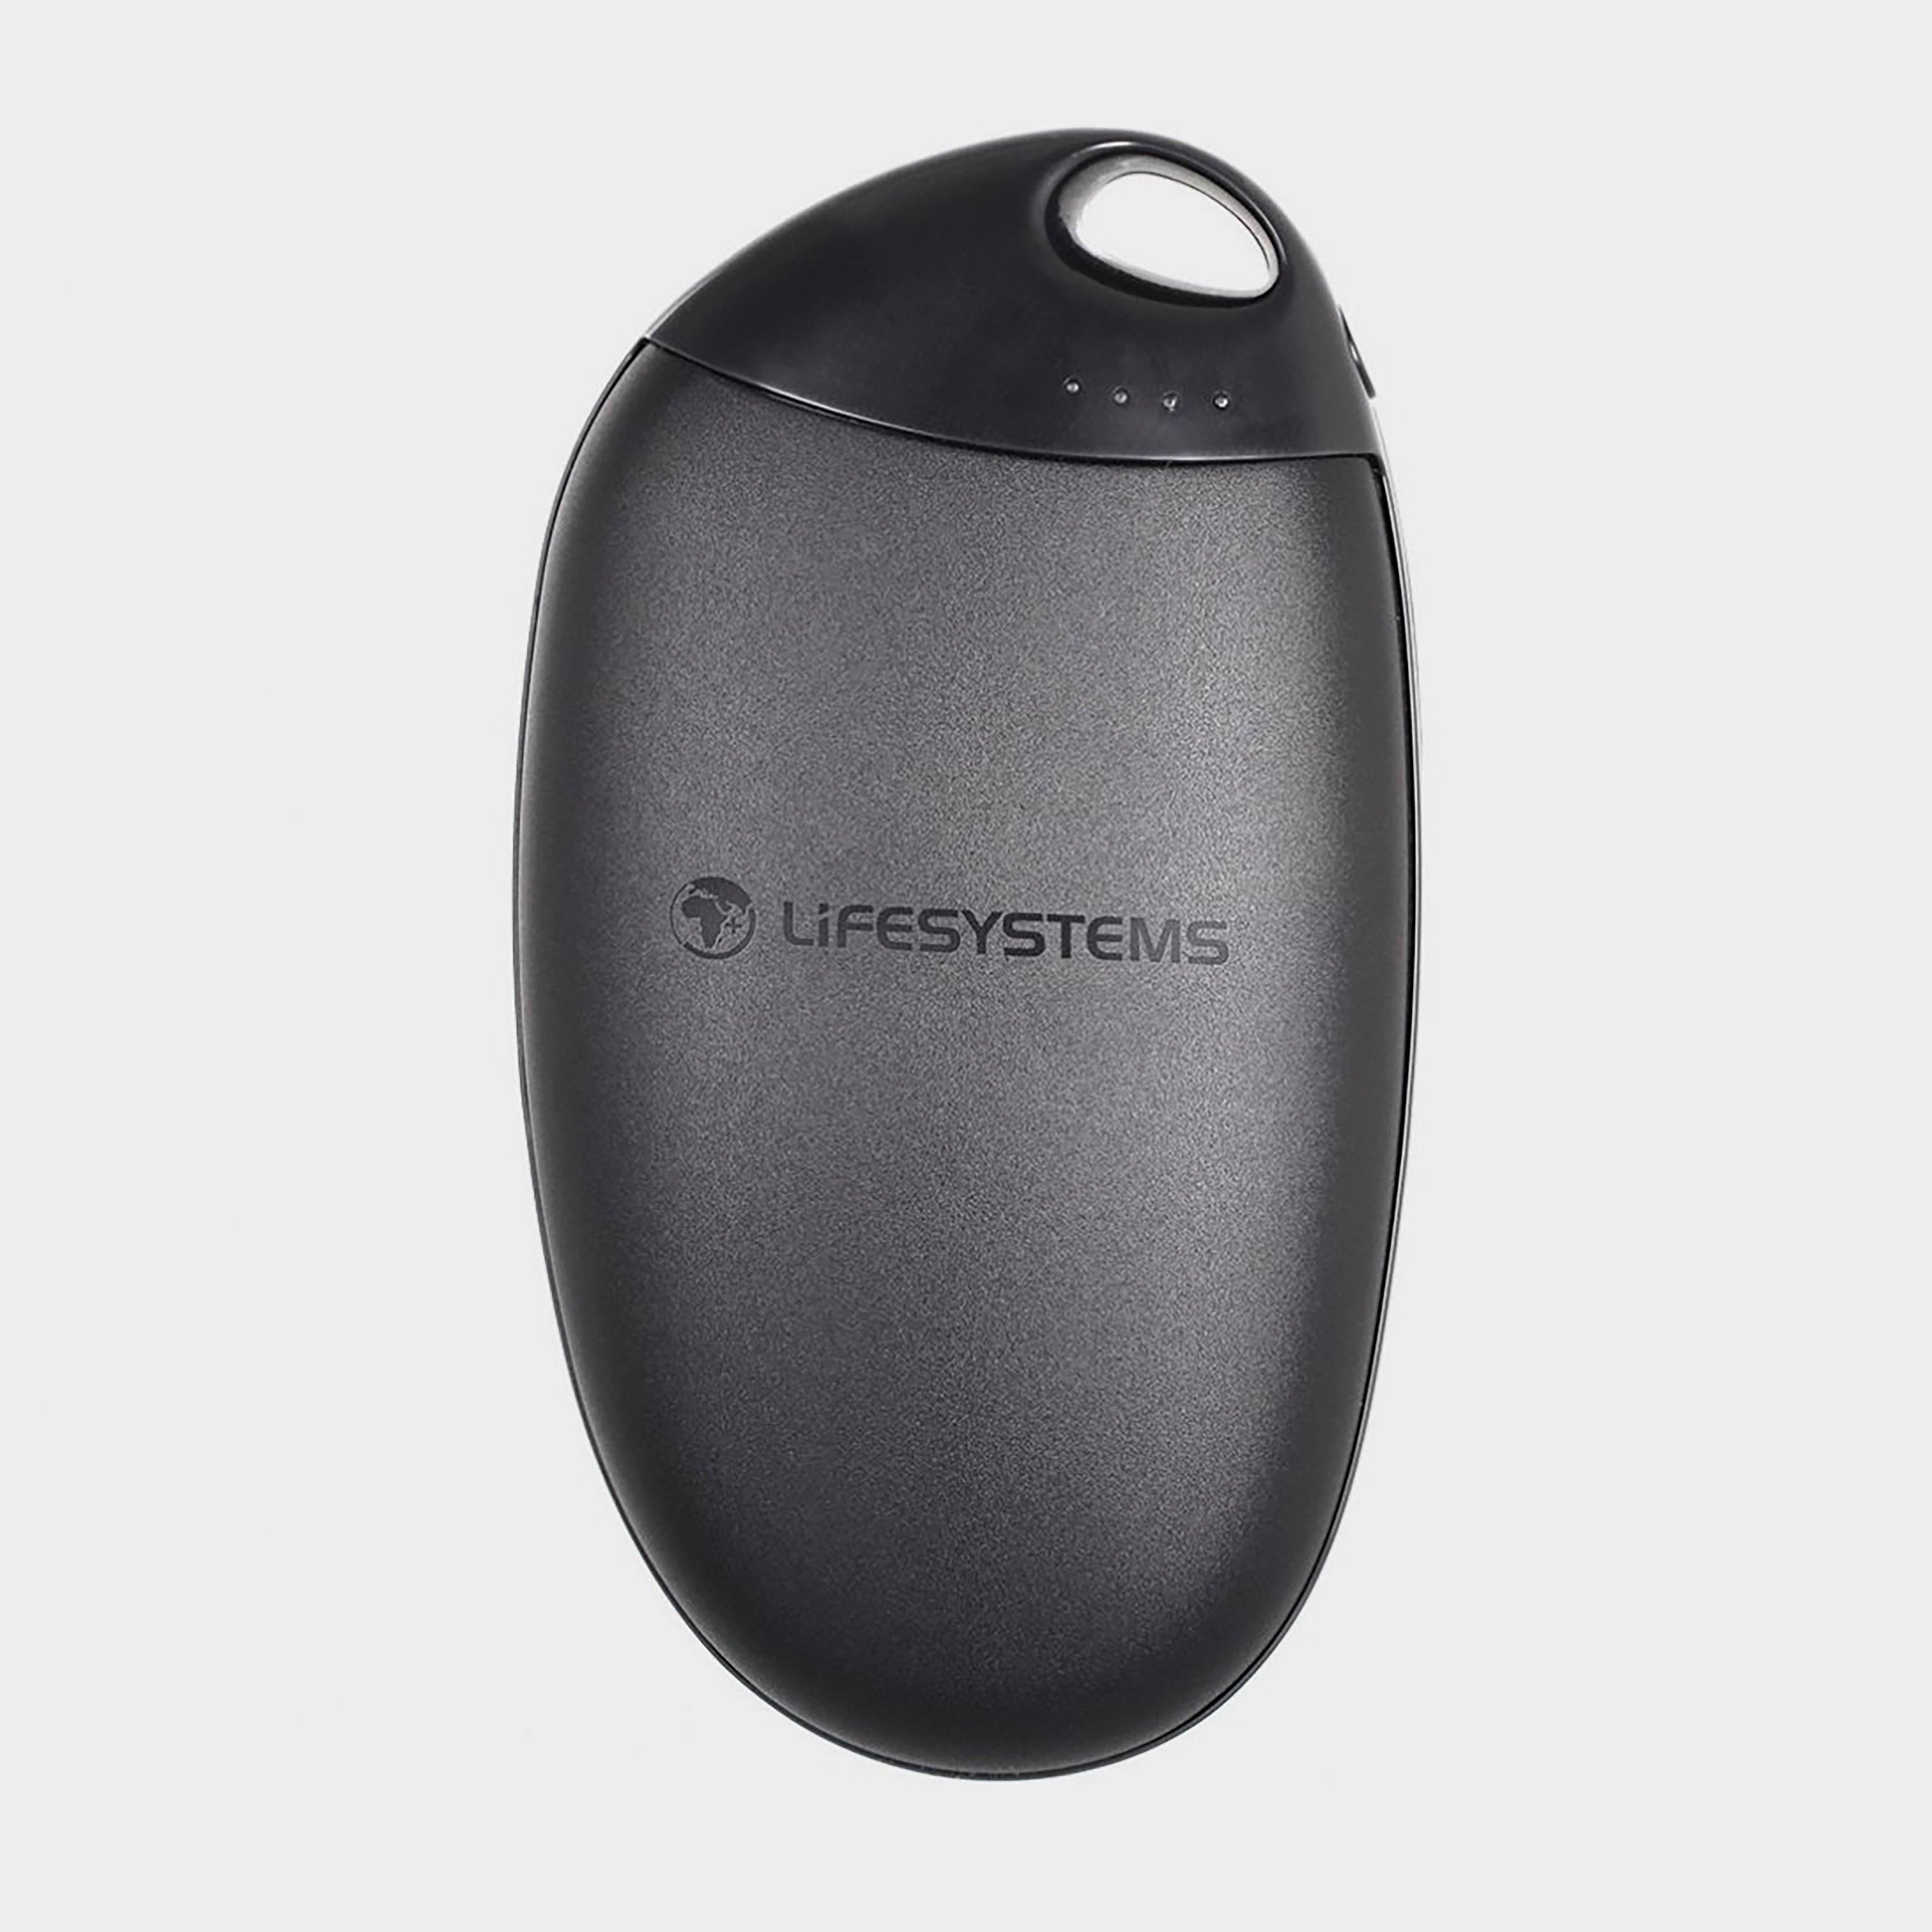 Image of Lifesystems Rechargeable Hand Warmer - Grey/Warm, Grey/WARM